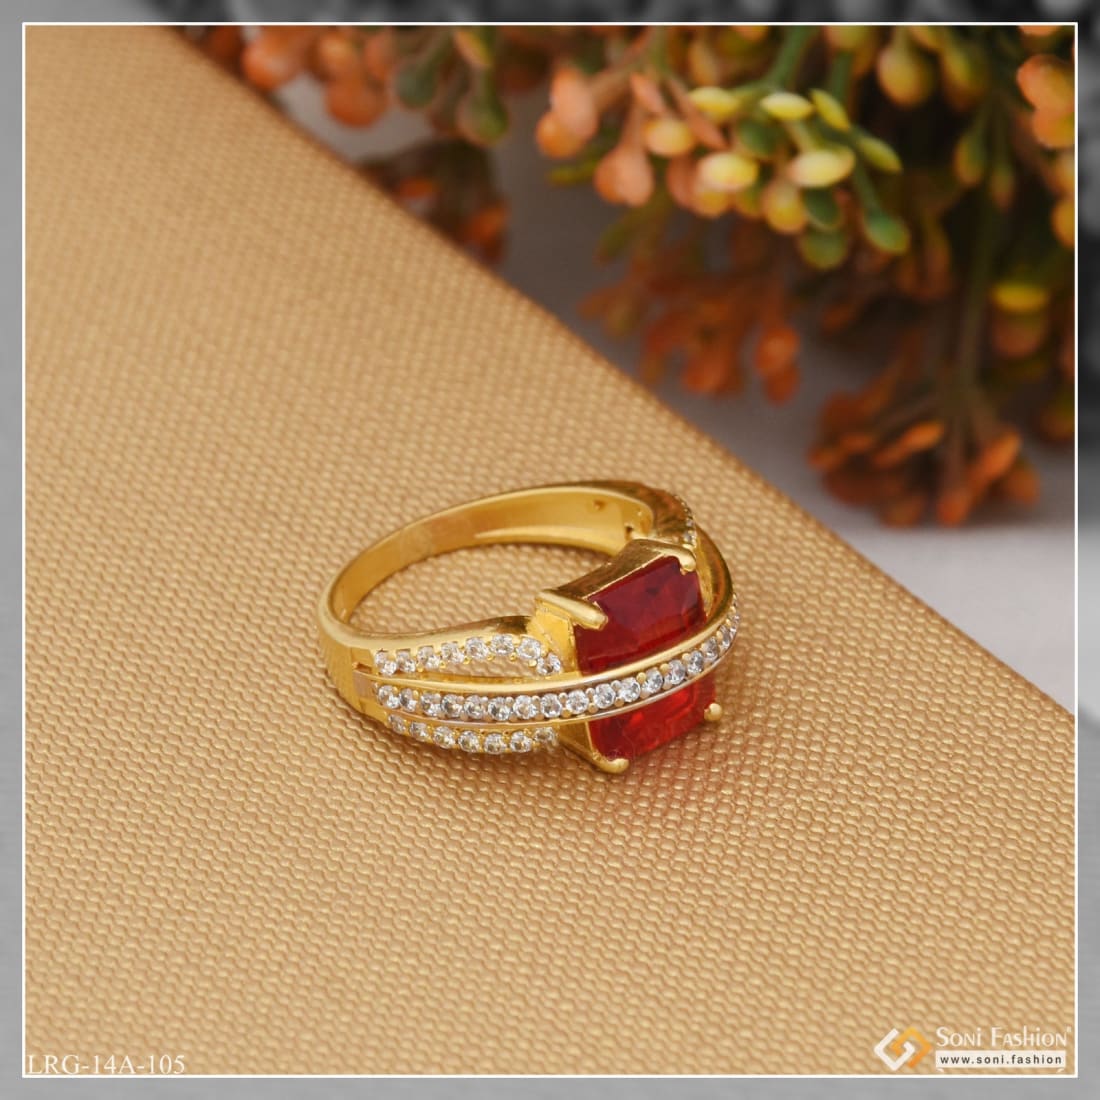 Bullet Jewelry Designs | Design Ring Gold | New Gold Ring Designs | Bullet  Jewelry Ring - Rings - Aliexpress